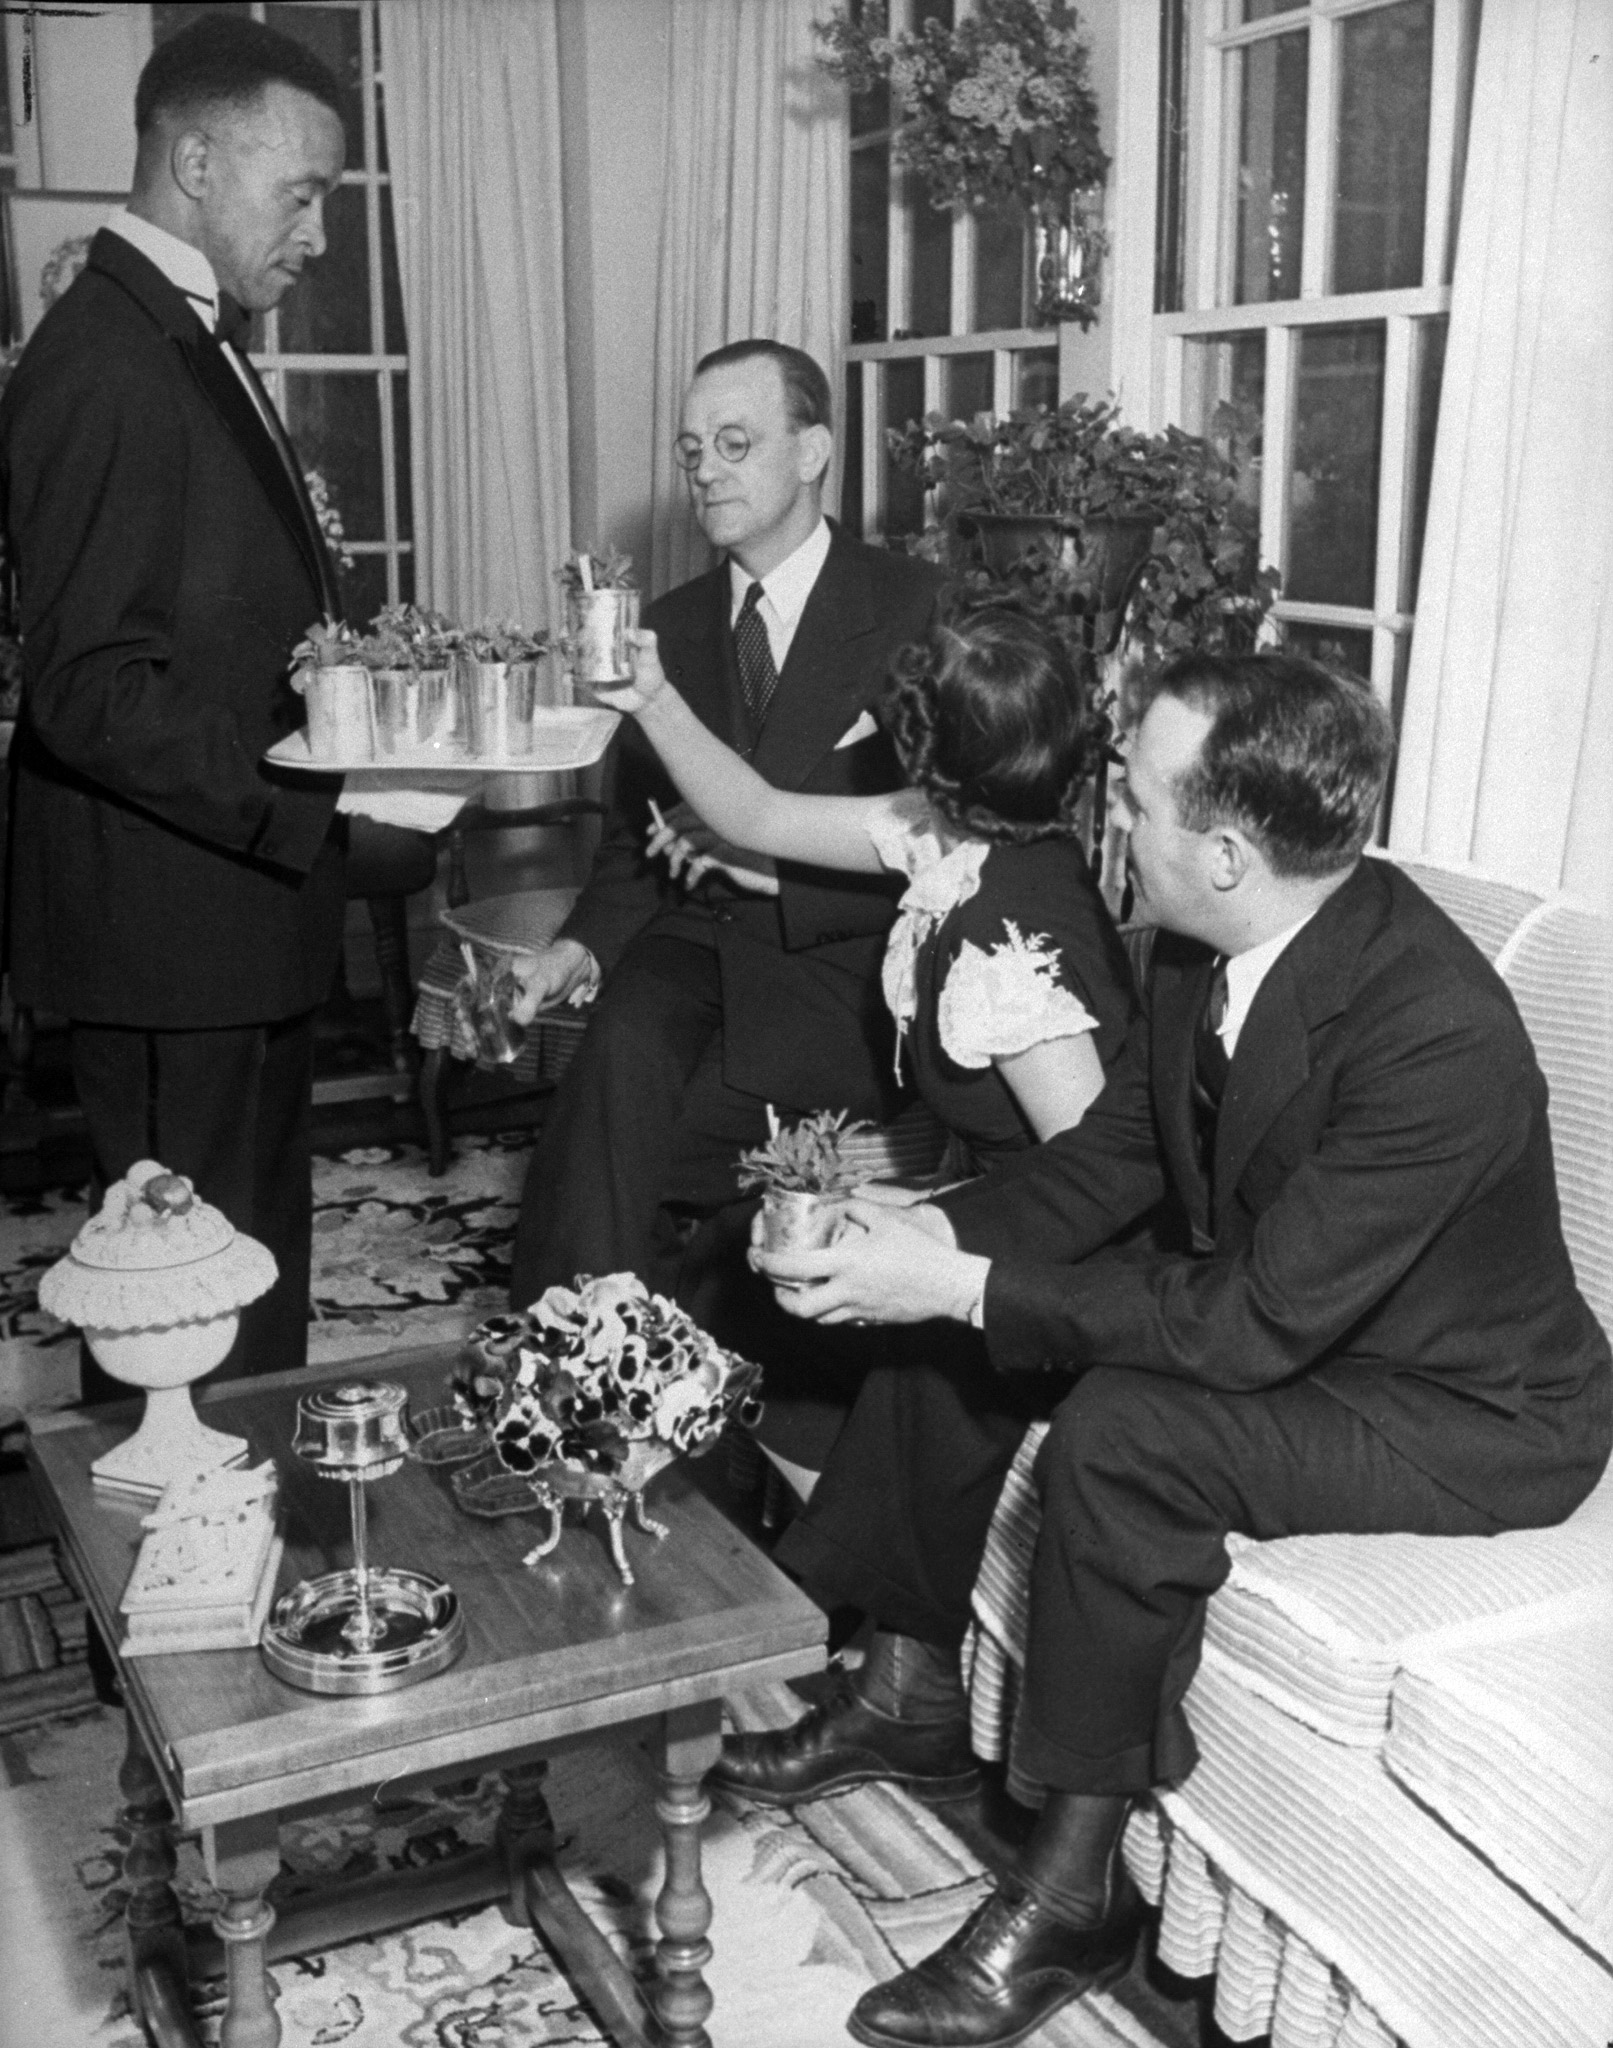 Congenial celebrants at the Van Winkle mint julep party included, from left to right, T. V. Hartnett, tobacco bigwig; Mary Van Winkle, the host's daughter; Richard Dewey.